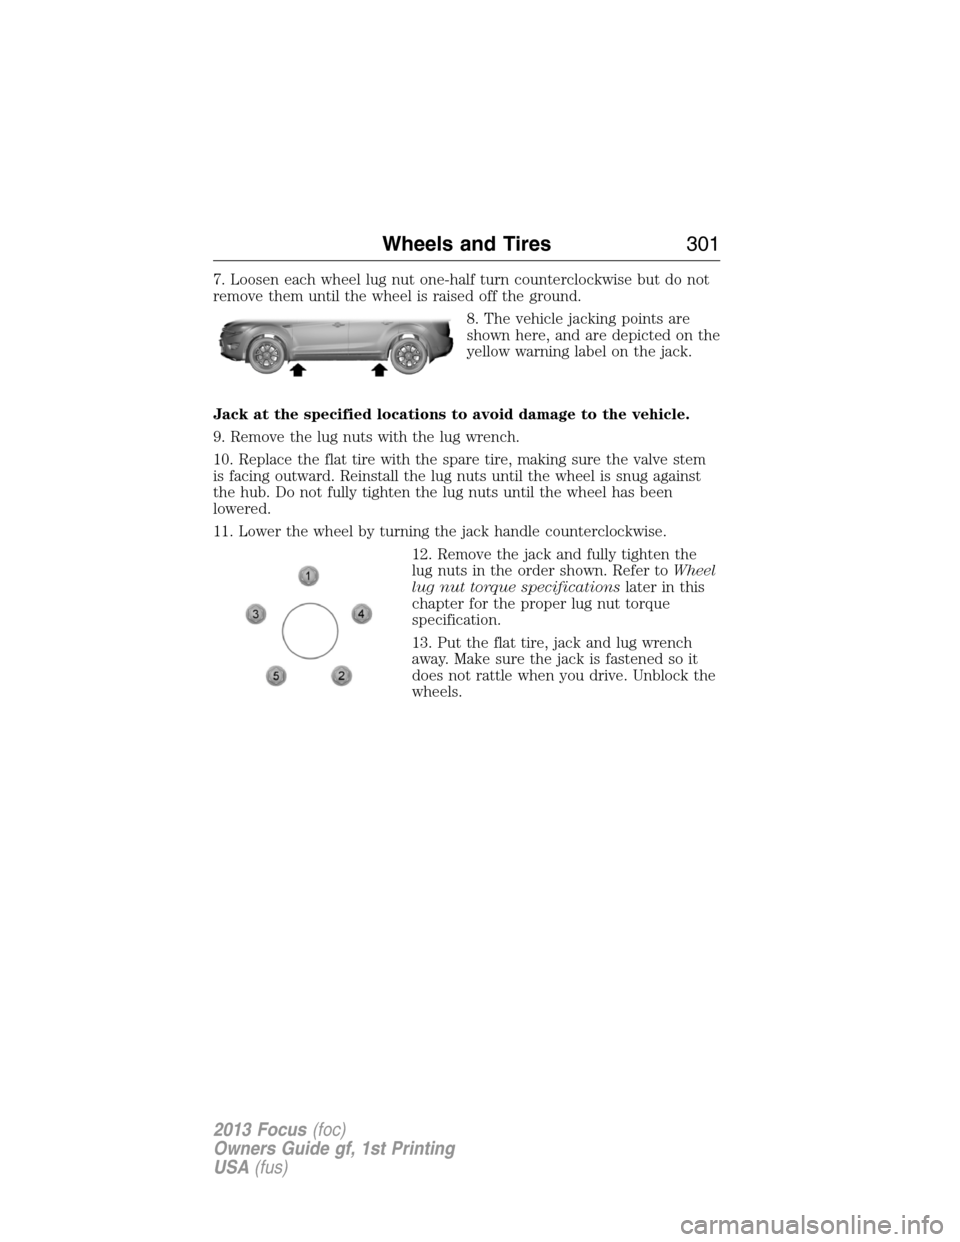 FORD FOCUS 2013 3.G Owners Manual 7. Loosen each wheel lug nut one-half turn counterclockwise but do not
remove them until the wheel is raised off the ground.
8. The vehicle jacking points are
shown here, and are depicted on the
yello